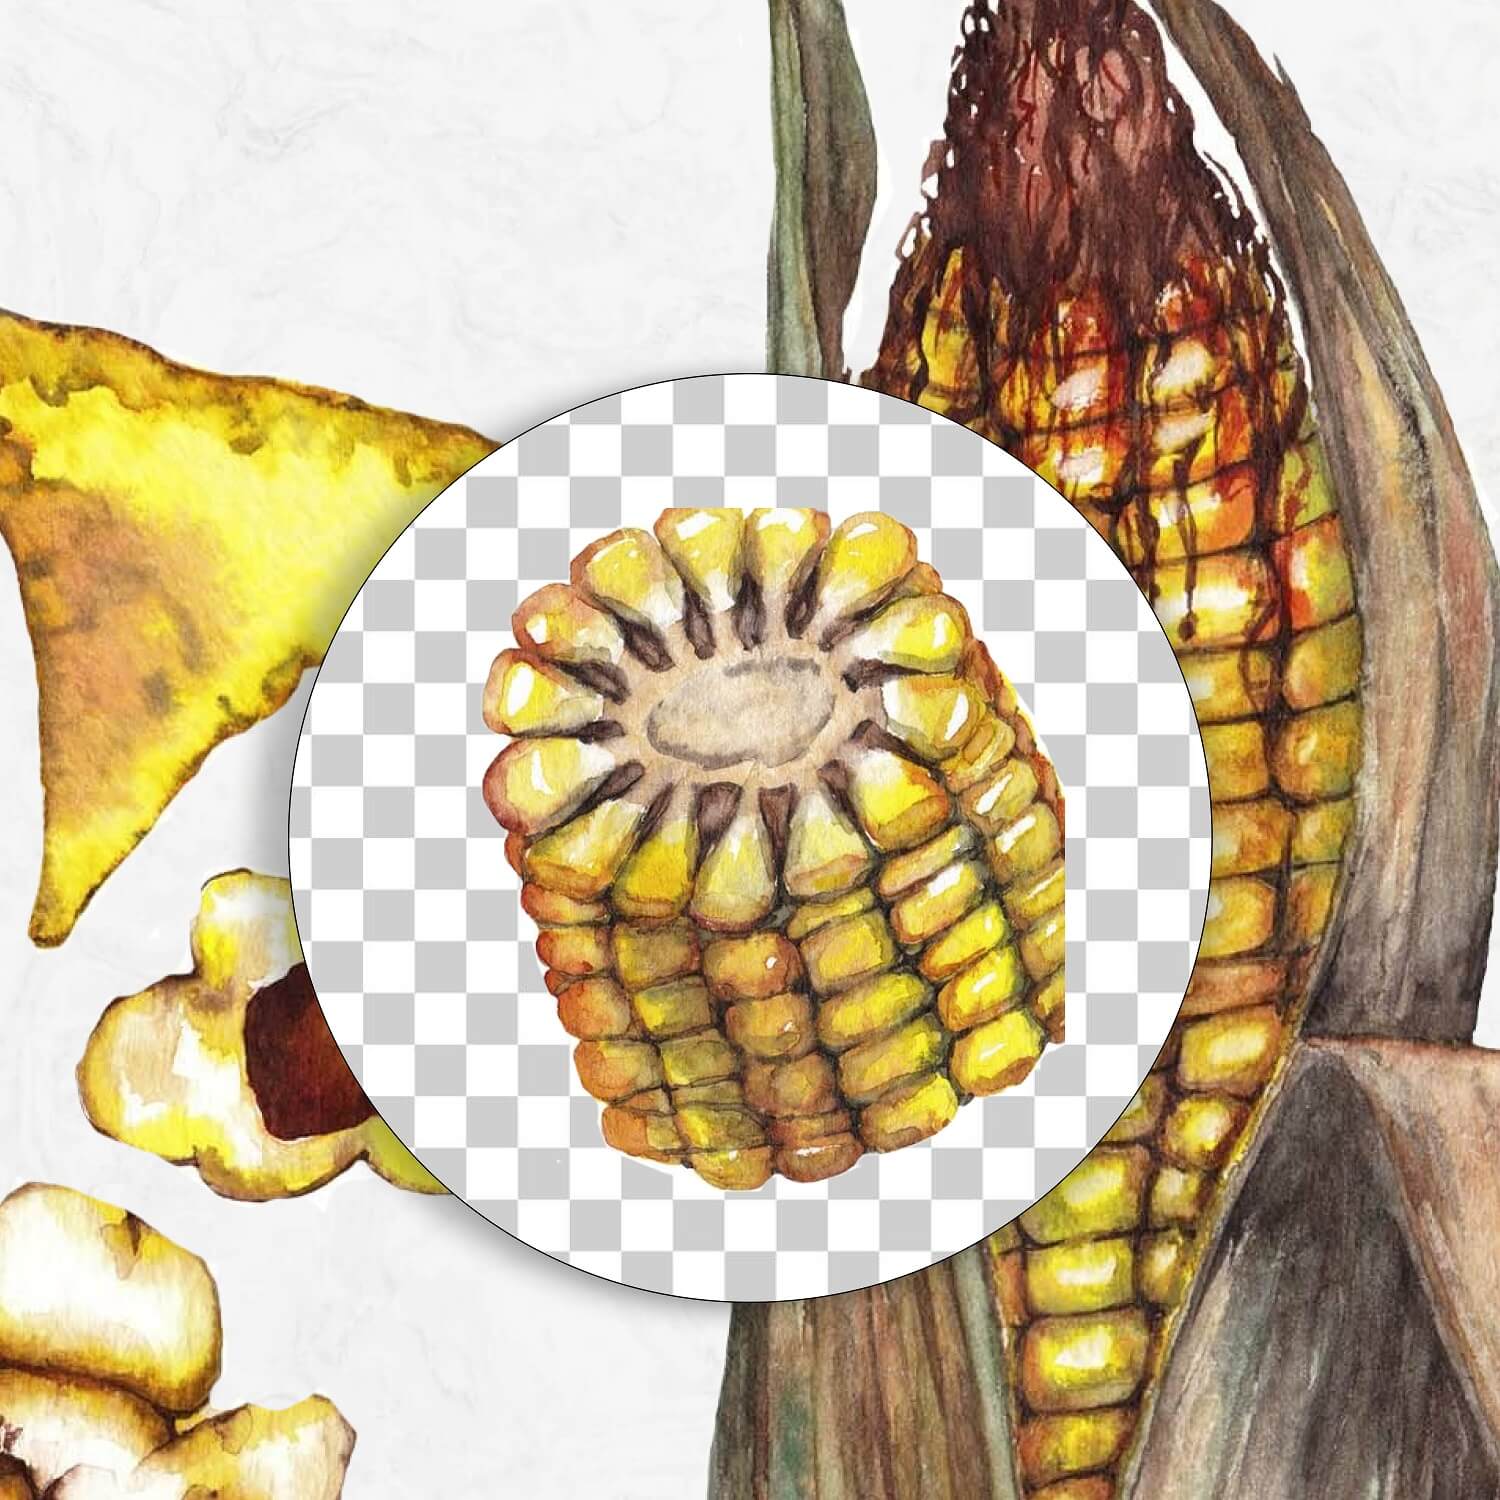 Image of corn on a transparent background.